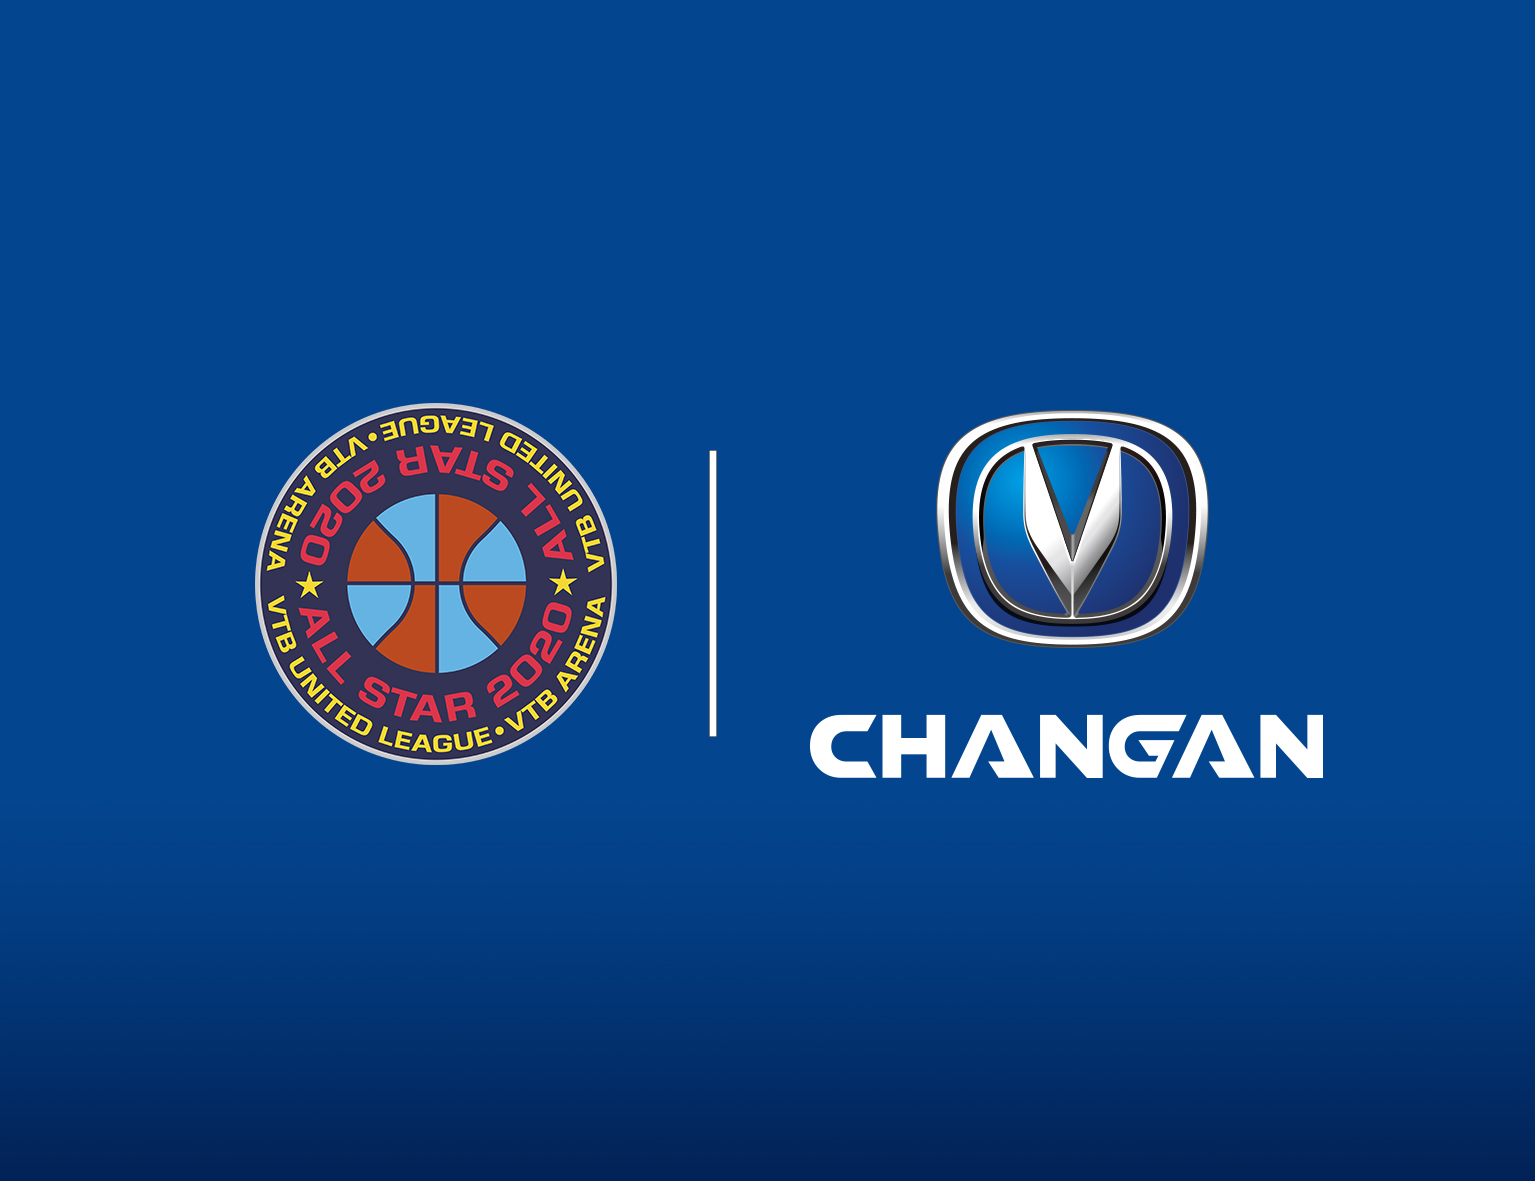 VTB United league and Changan announce partnership